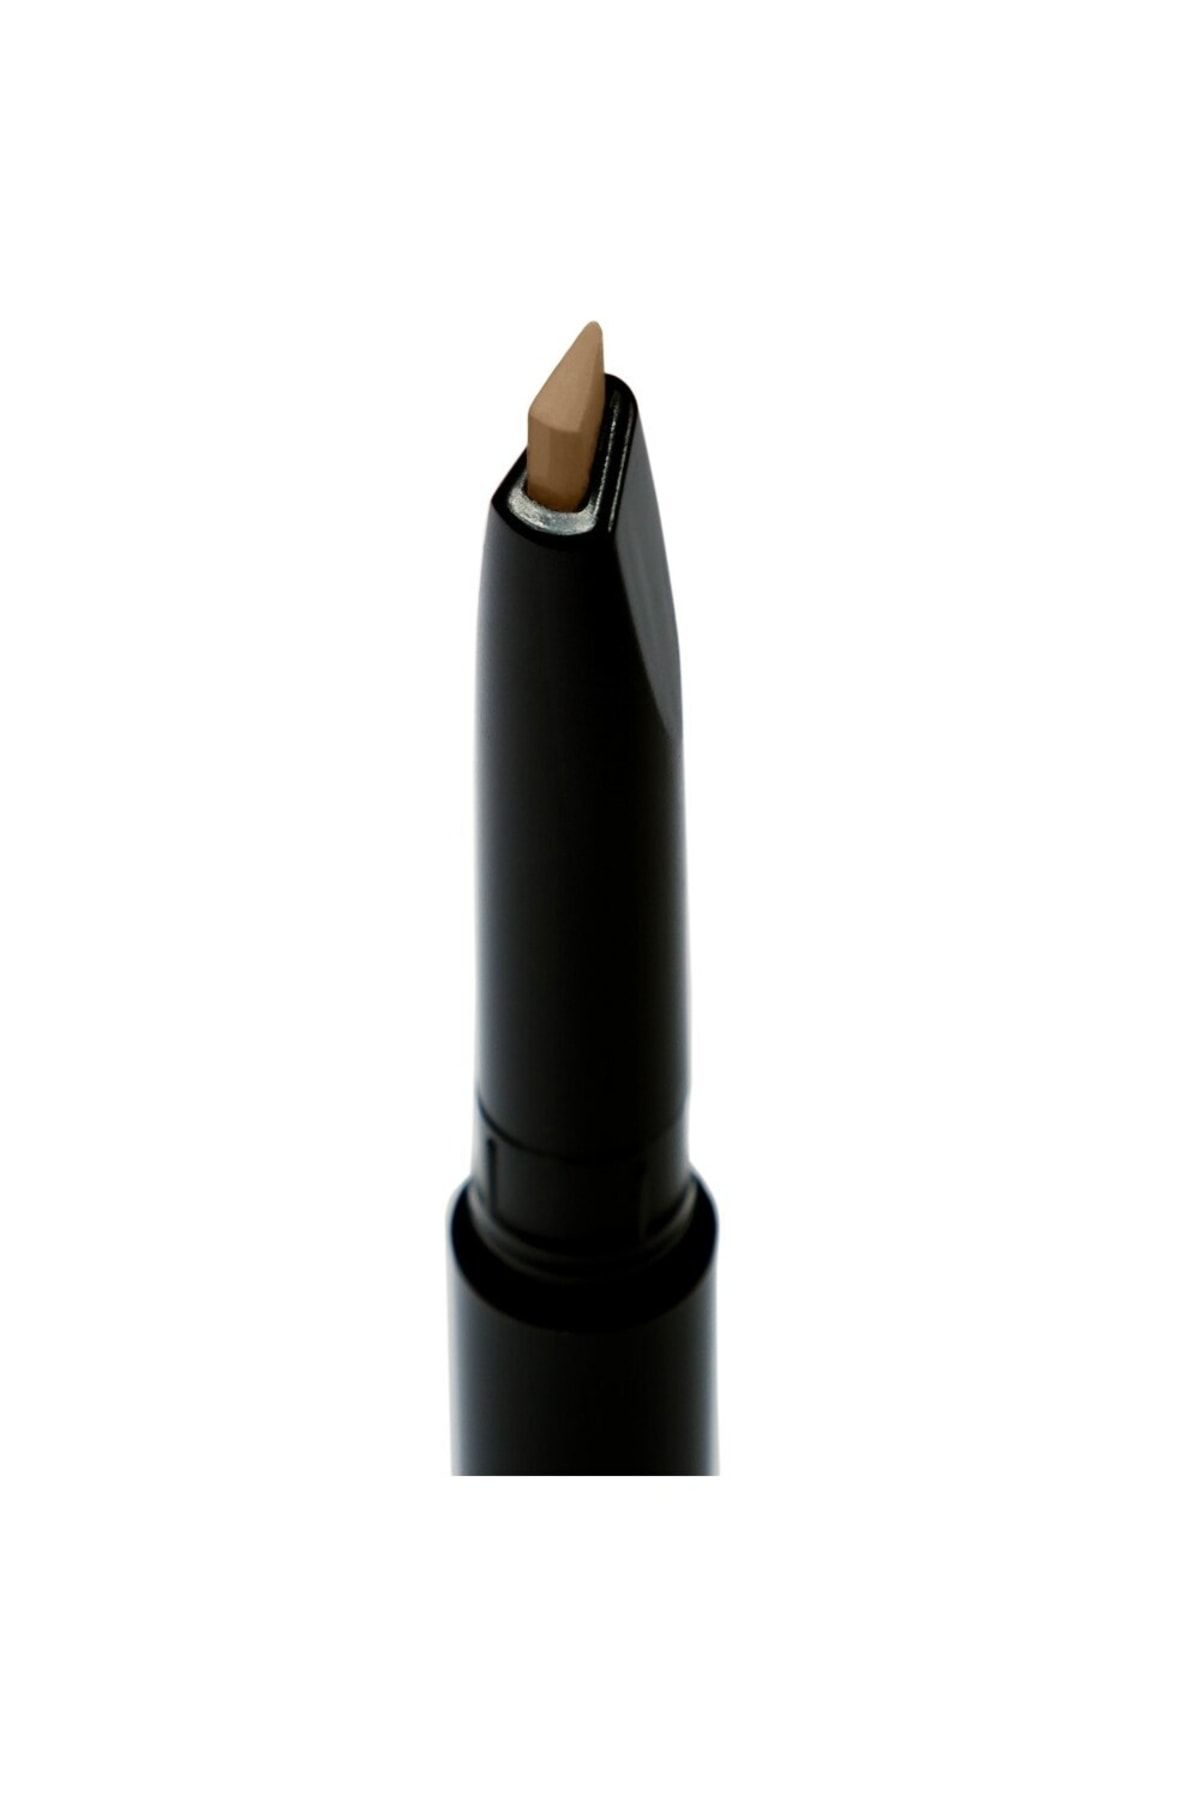 WET N WİLD Ultimate Retractable Brow Pencil Kaş Kalemi Taupe E625a